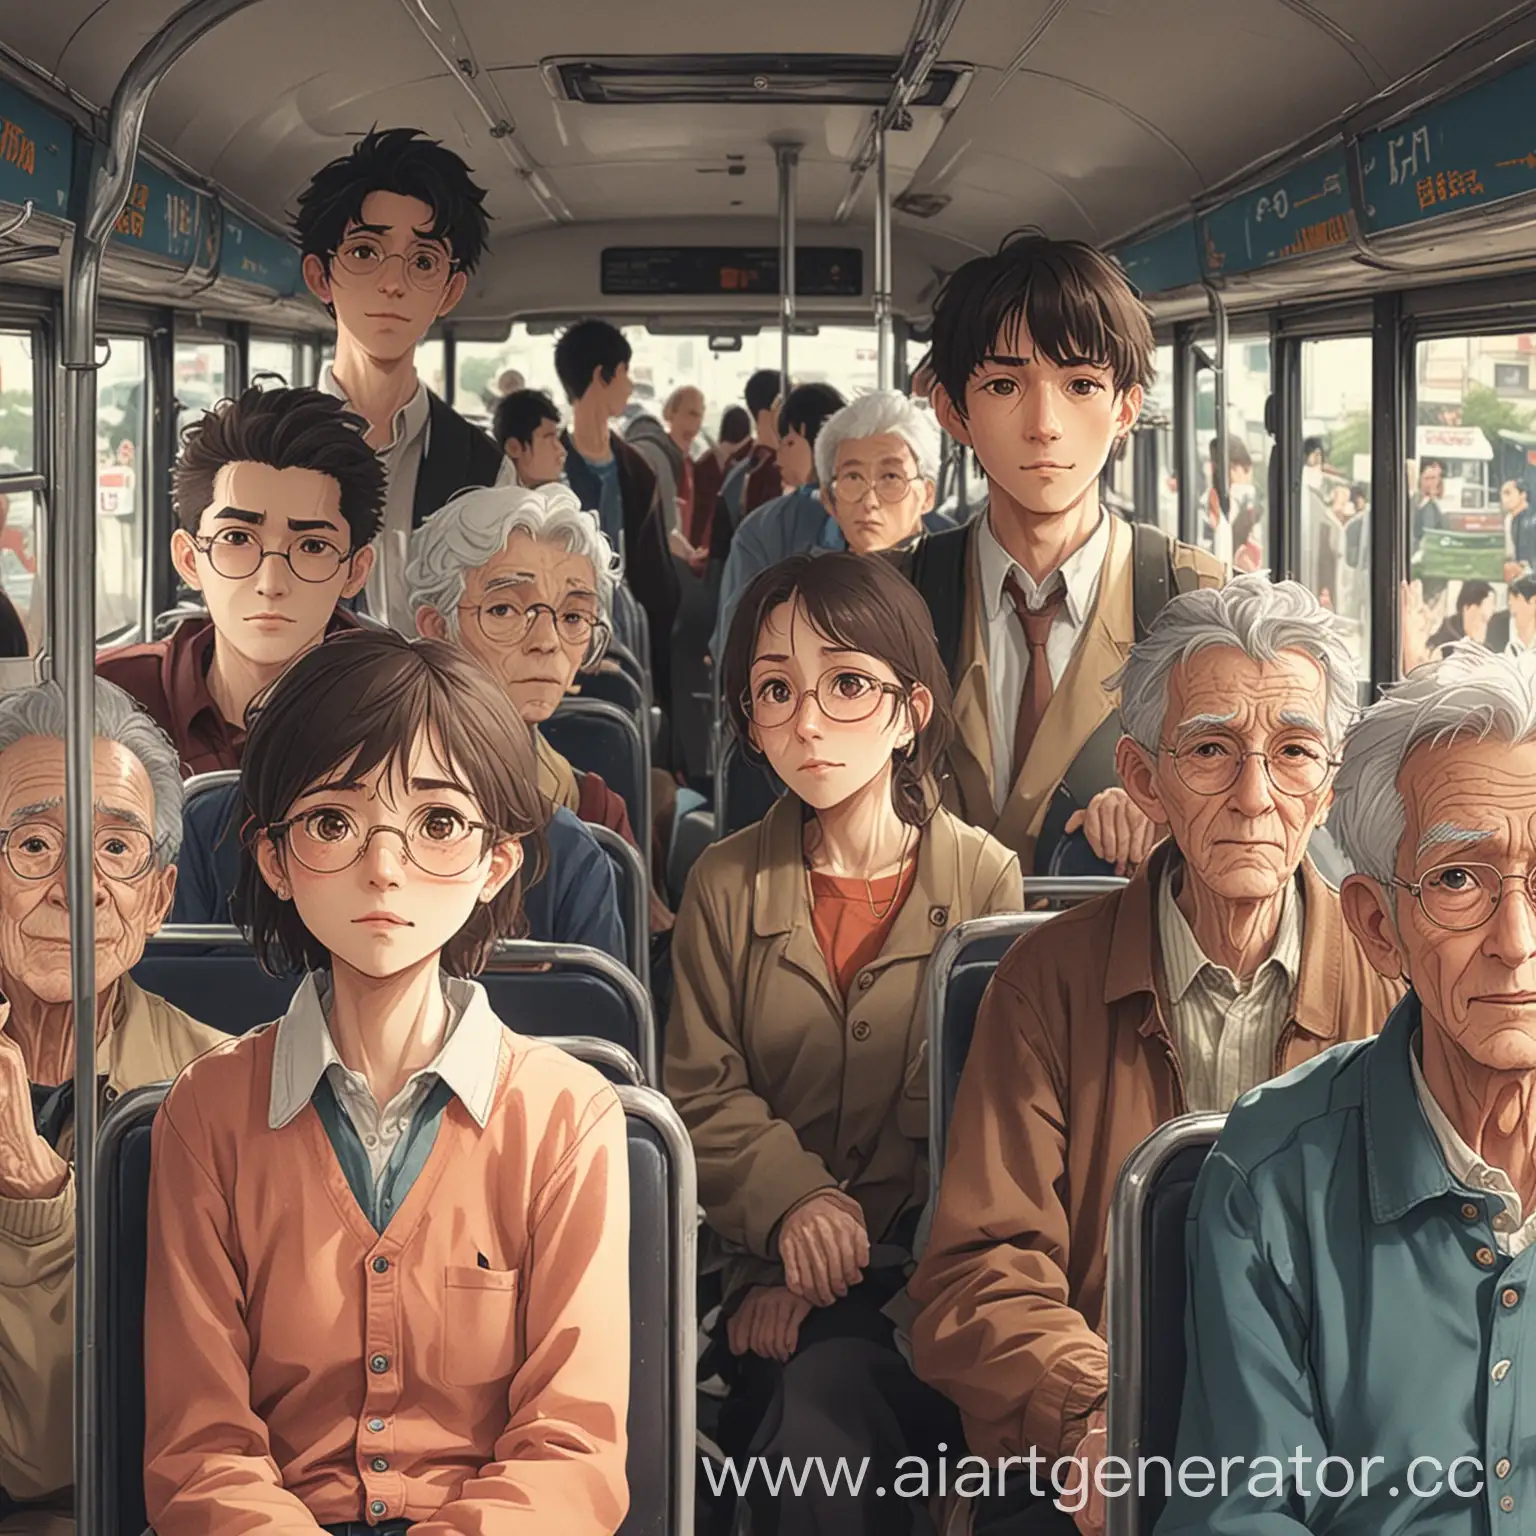 a young man on a bus full of old people in anime style